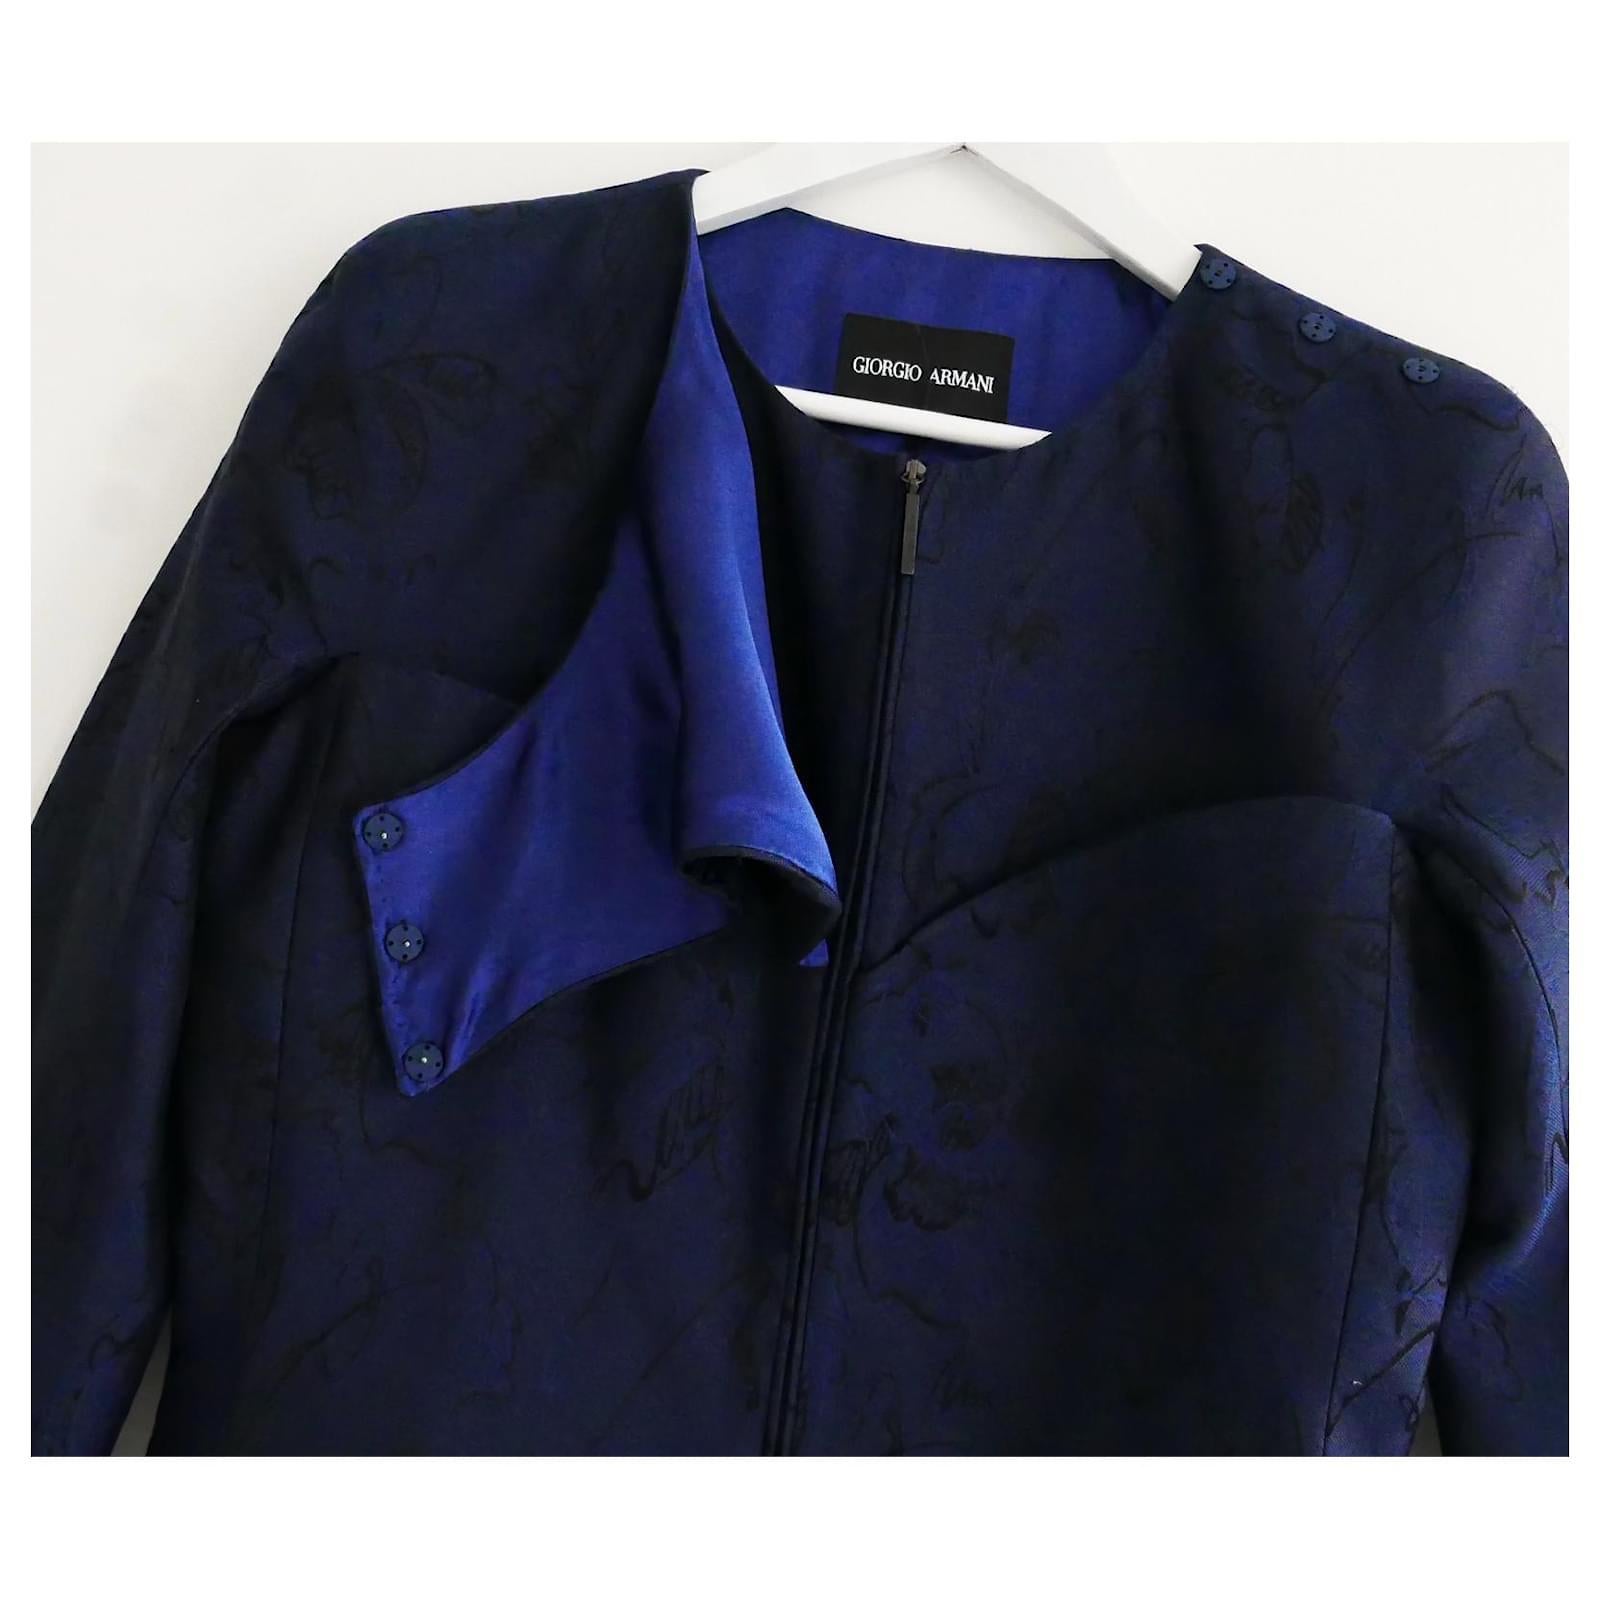 Exquisite, super high quality Giorgio Armani corset jacket. bought for £1700 and new with tags/authenticity card. 
Made from navy and black silk brocade with a thick, super glossy blue silk lining. Superbly tailored and constructed with super sleek